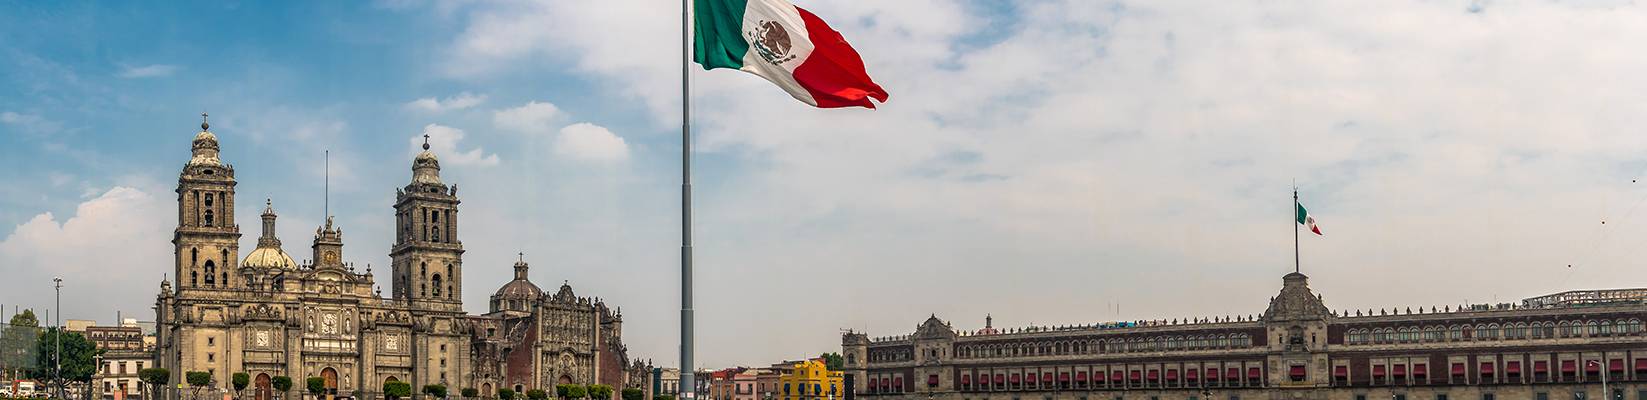 Where to go in Mexico City